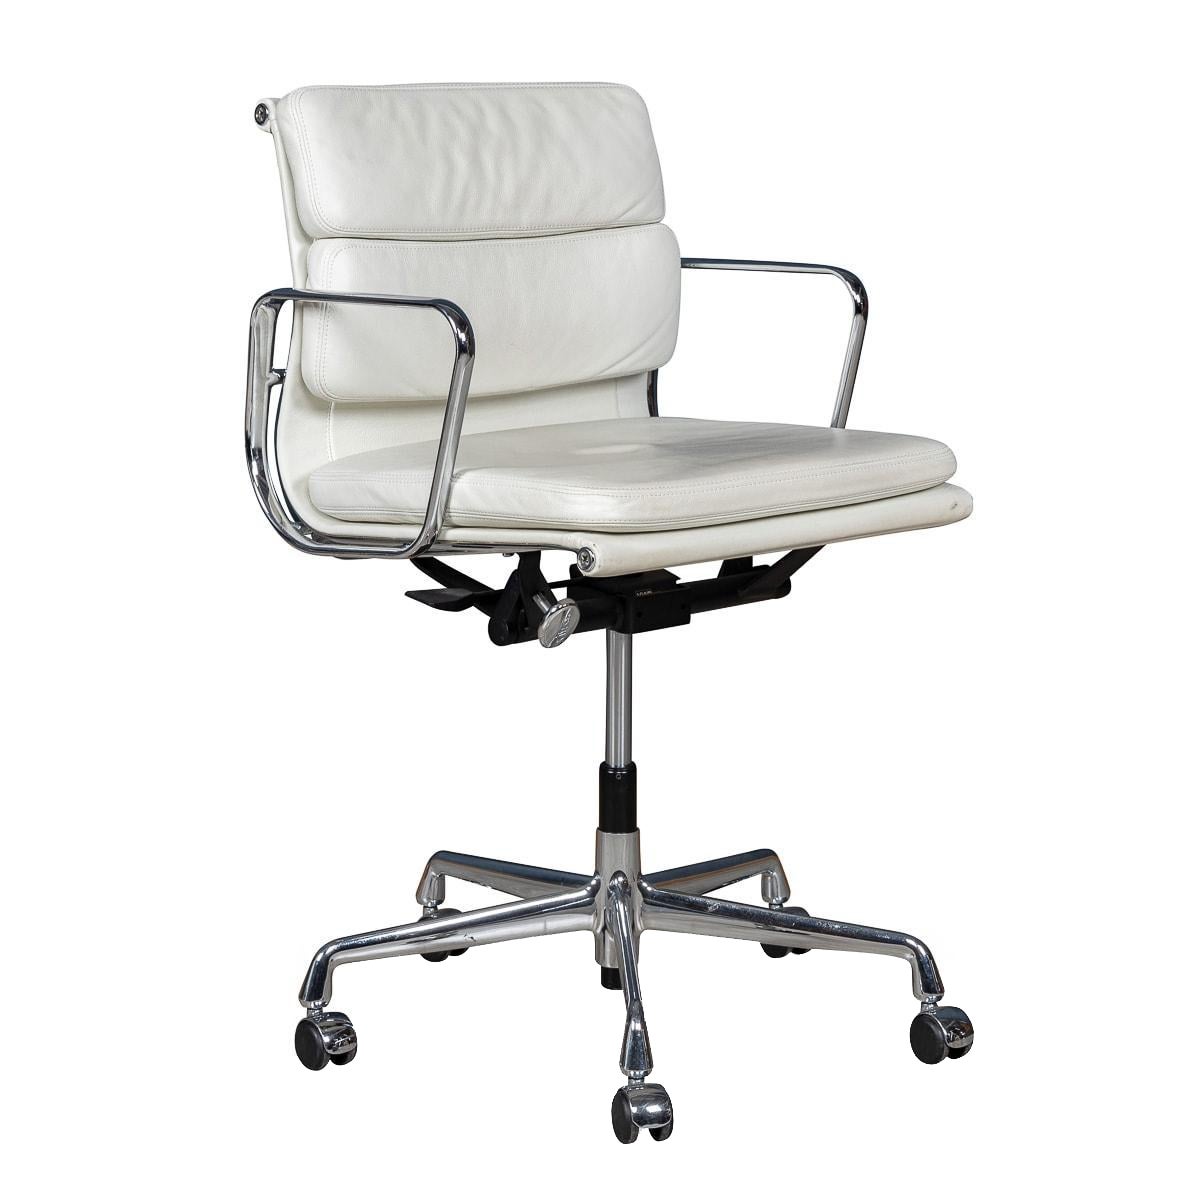 Stunning EA217 Eames Chair In "White Snow" Leather By Vitra